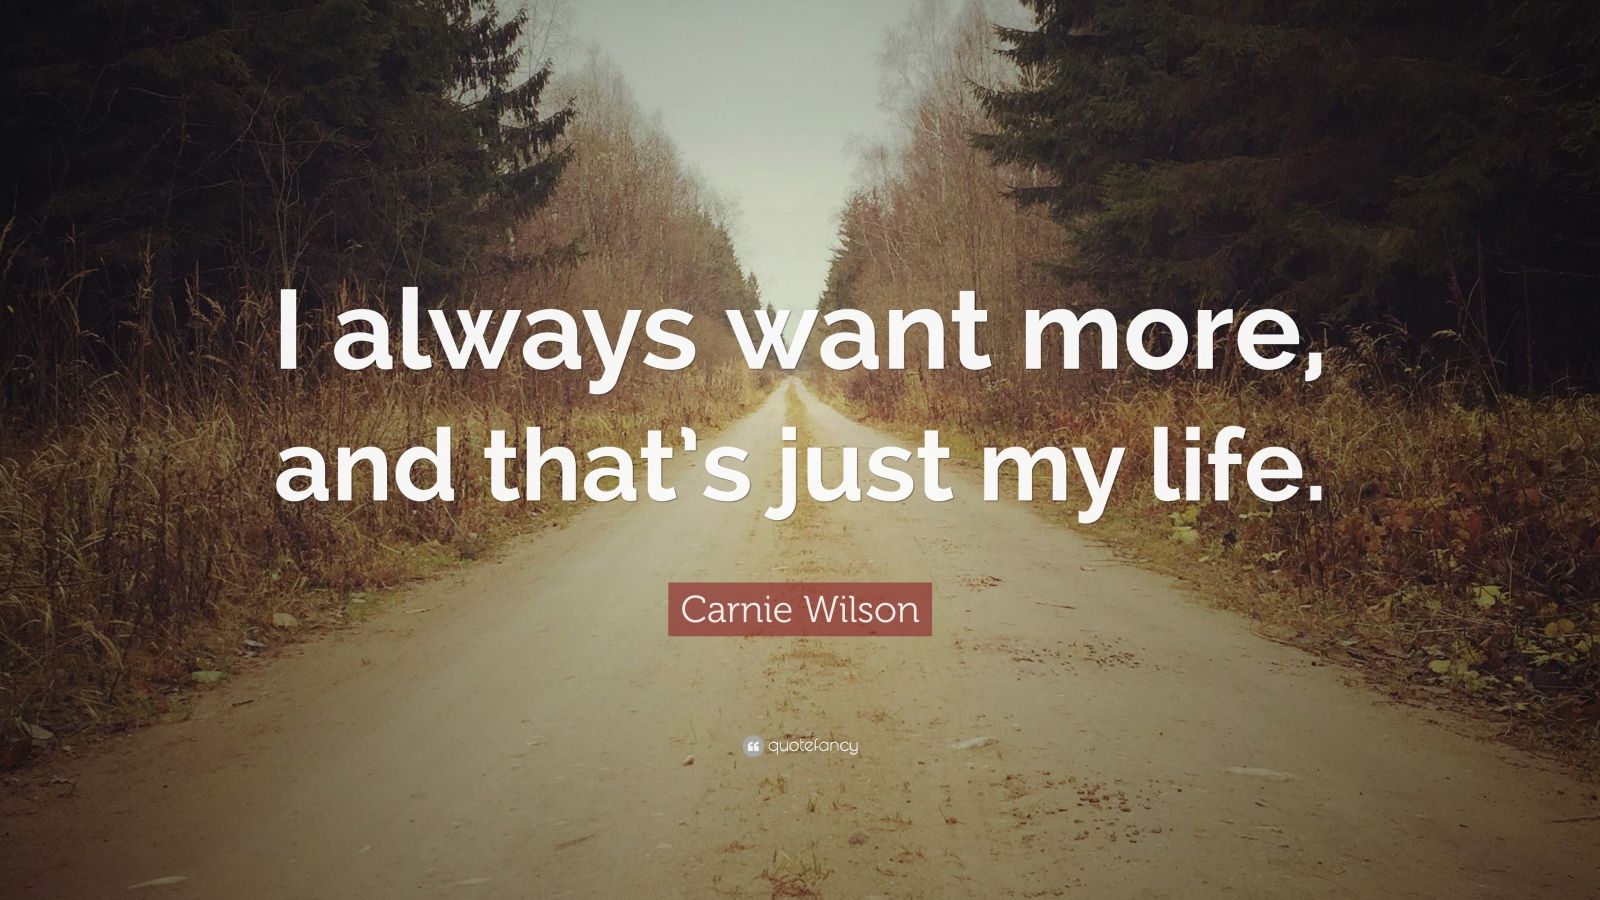 Carnie Wilson Quote “I always want more, and that’s just my life.” (7